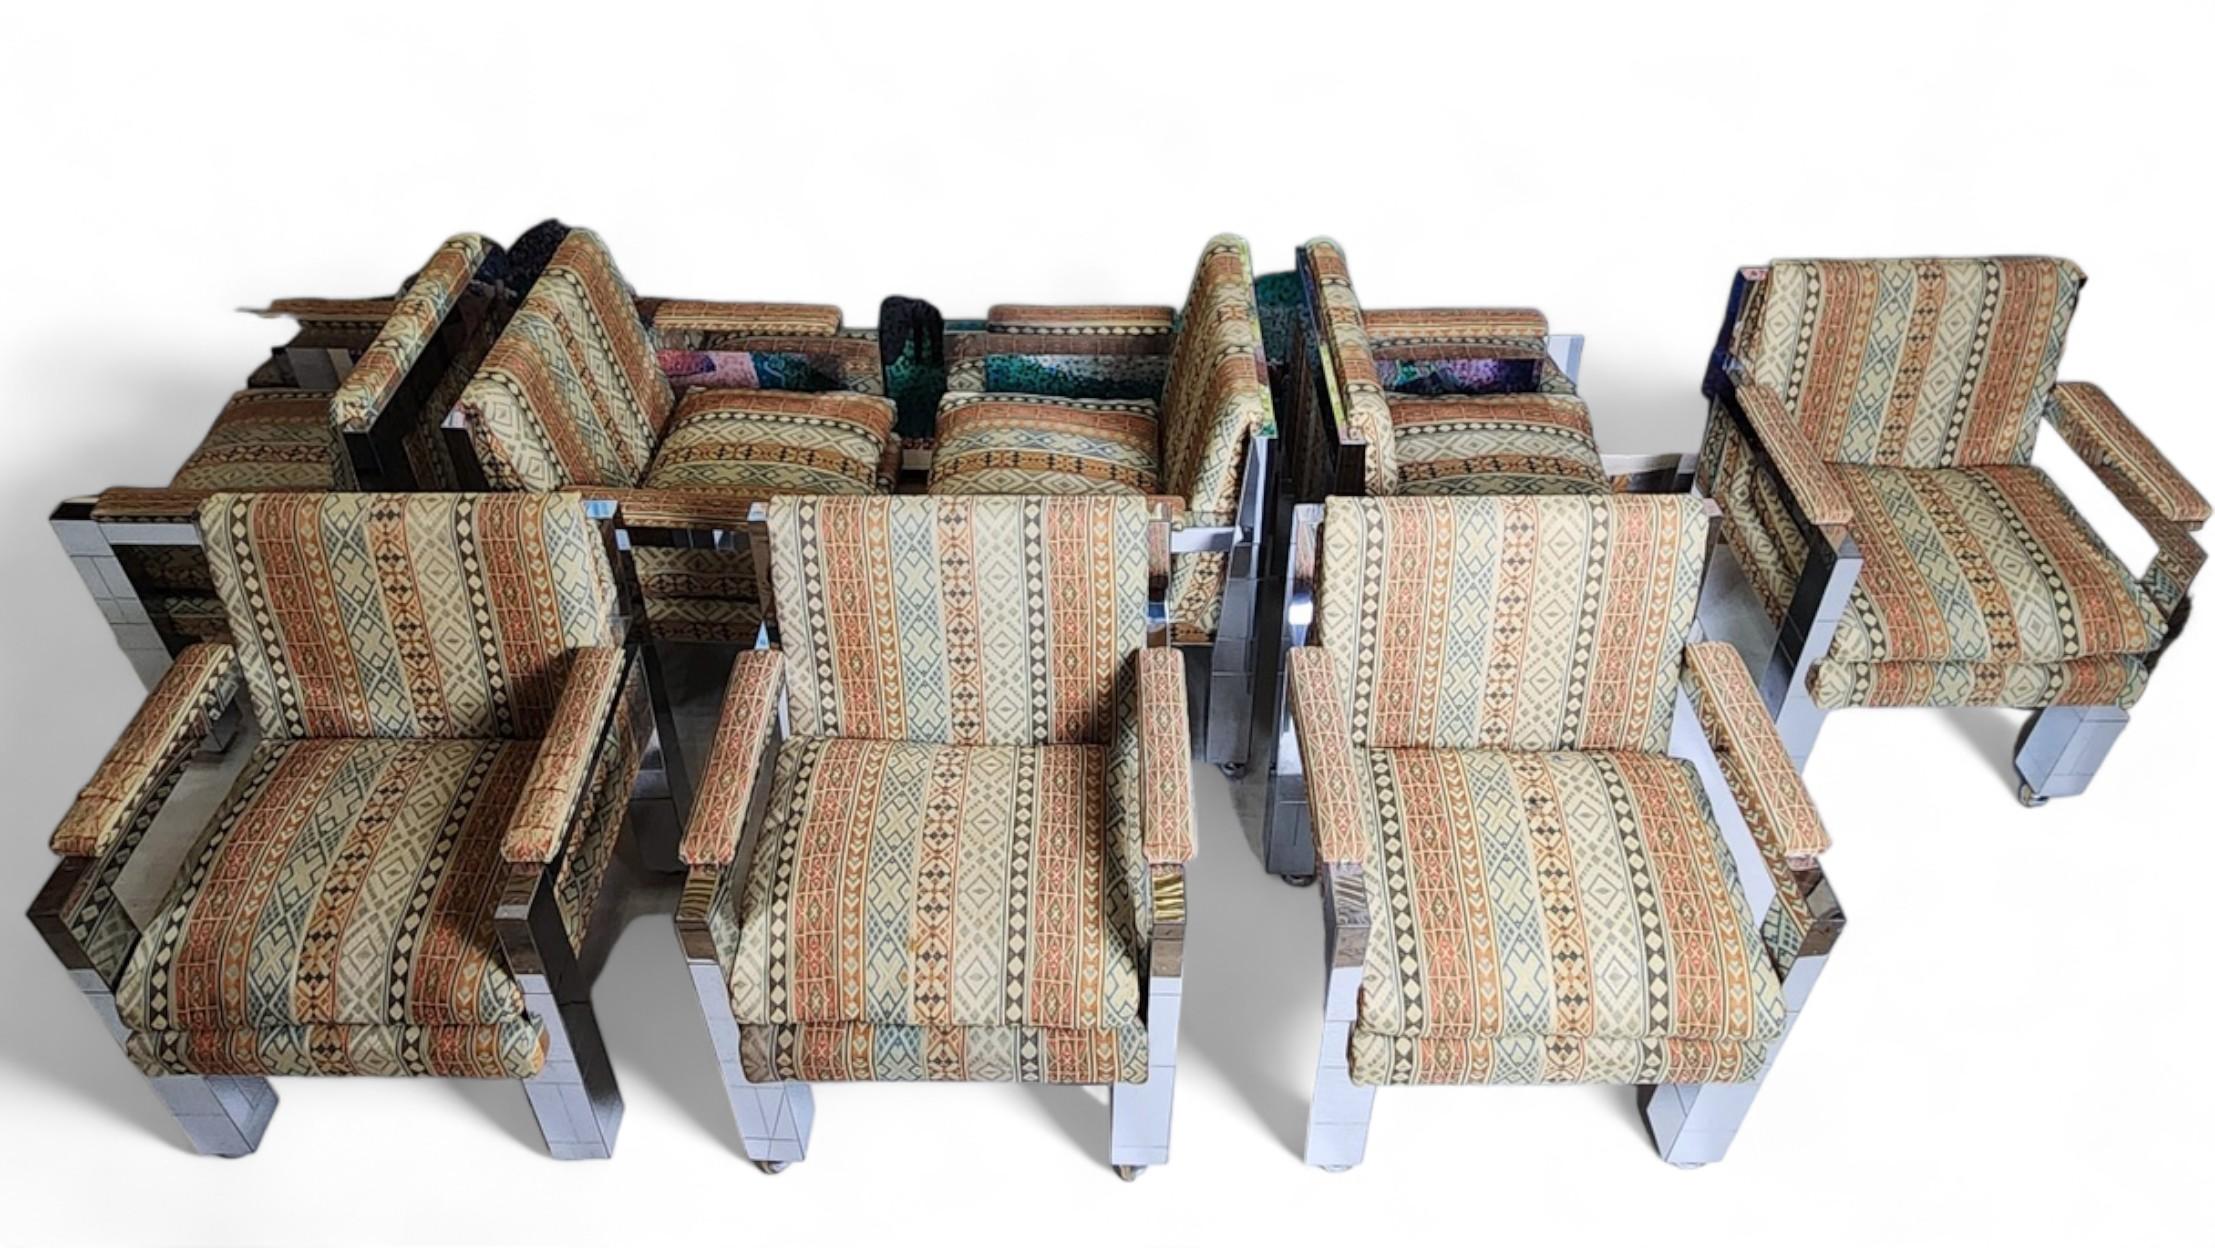 Paul Evans Studio armchairs designed for a commission for the home of personal friends.
The upholstery is original as pictured in the last vintage photo.
Dorsey Reading, Paul Evans's studio chief has provided a certificate of authenticity that the